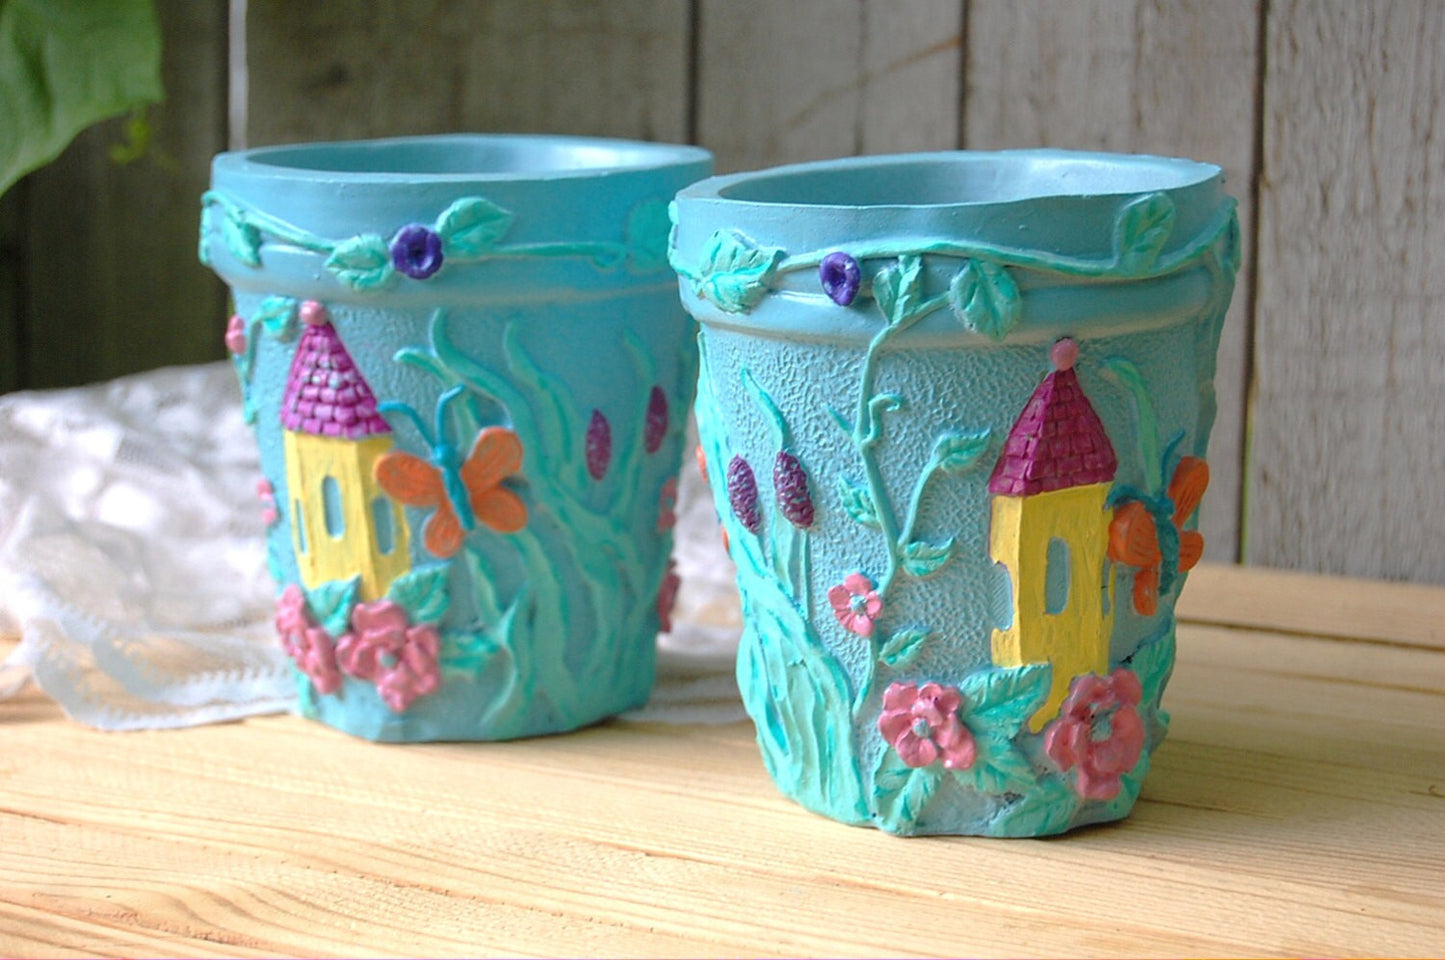 Blue shabby chic flower or herb pots - The Vintage Artistry